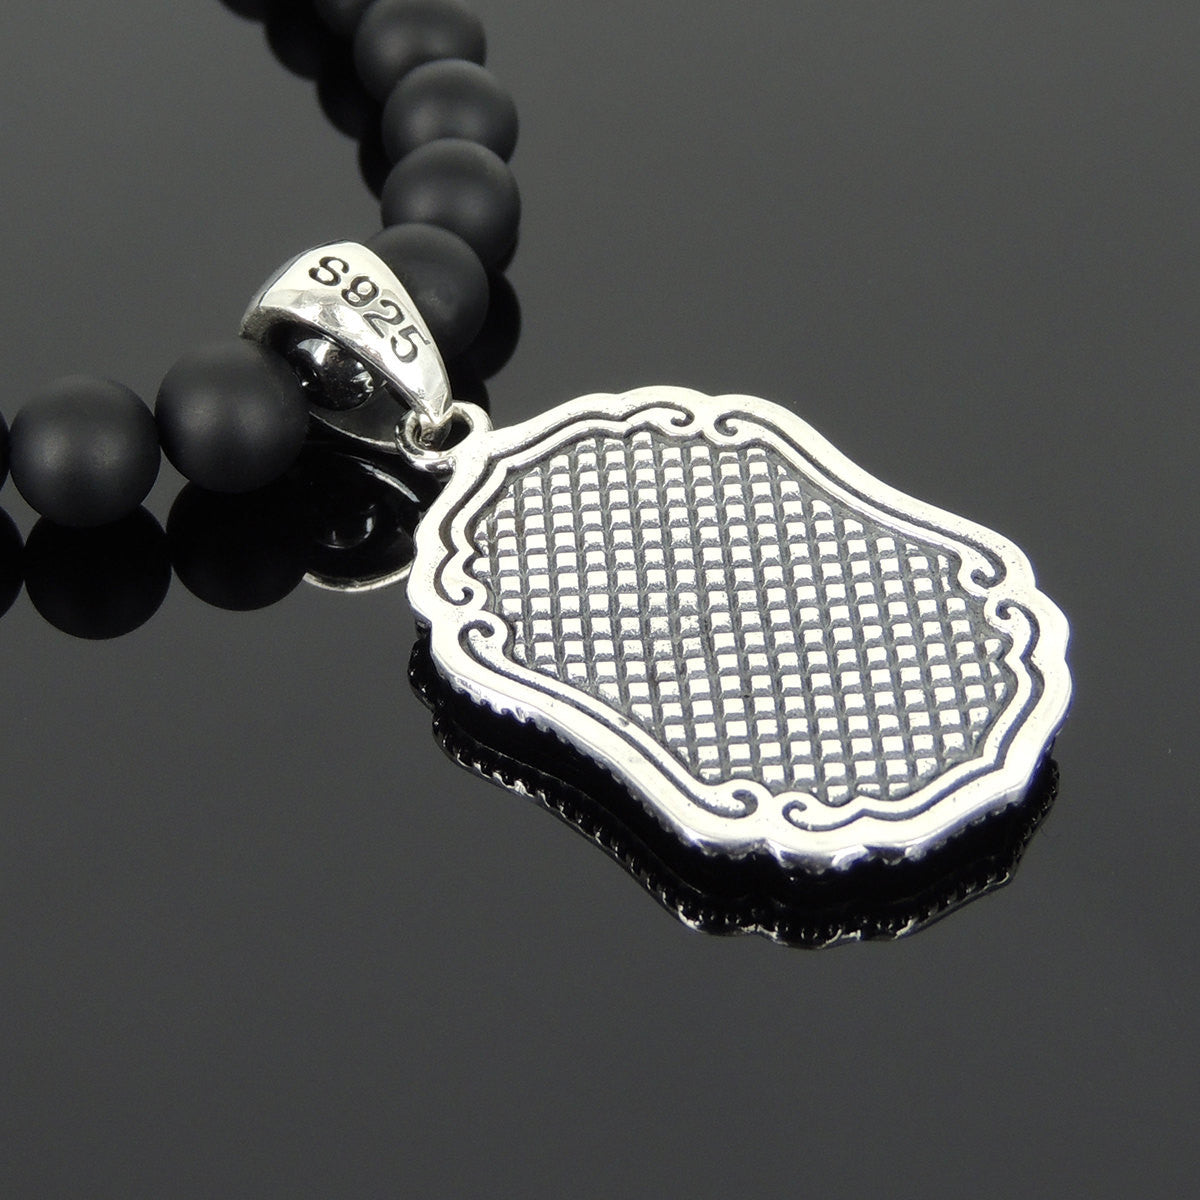 Matte Black Onyx & Hematite Healing Gemstone Necklace with S925 Sterling Silver Guanyin Pendant Sakyamuni Buddha Beads Spacers & S-hook Clasp- Handmade by Gem & Silver NK130